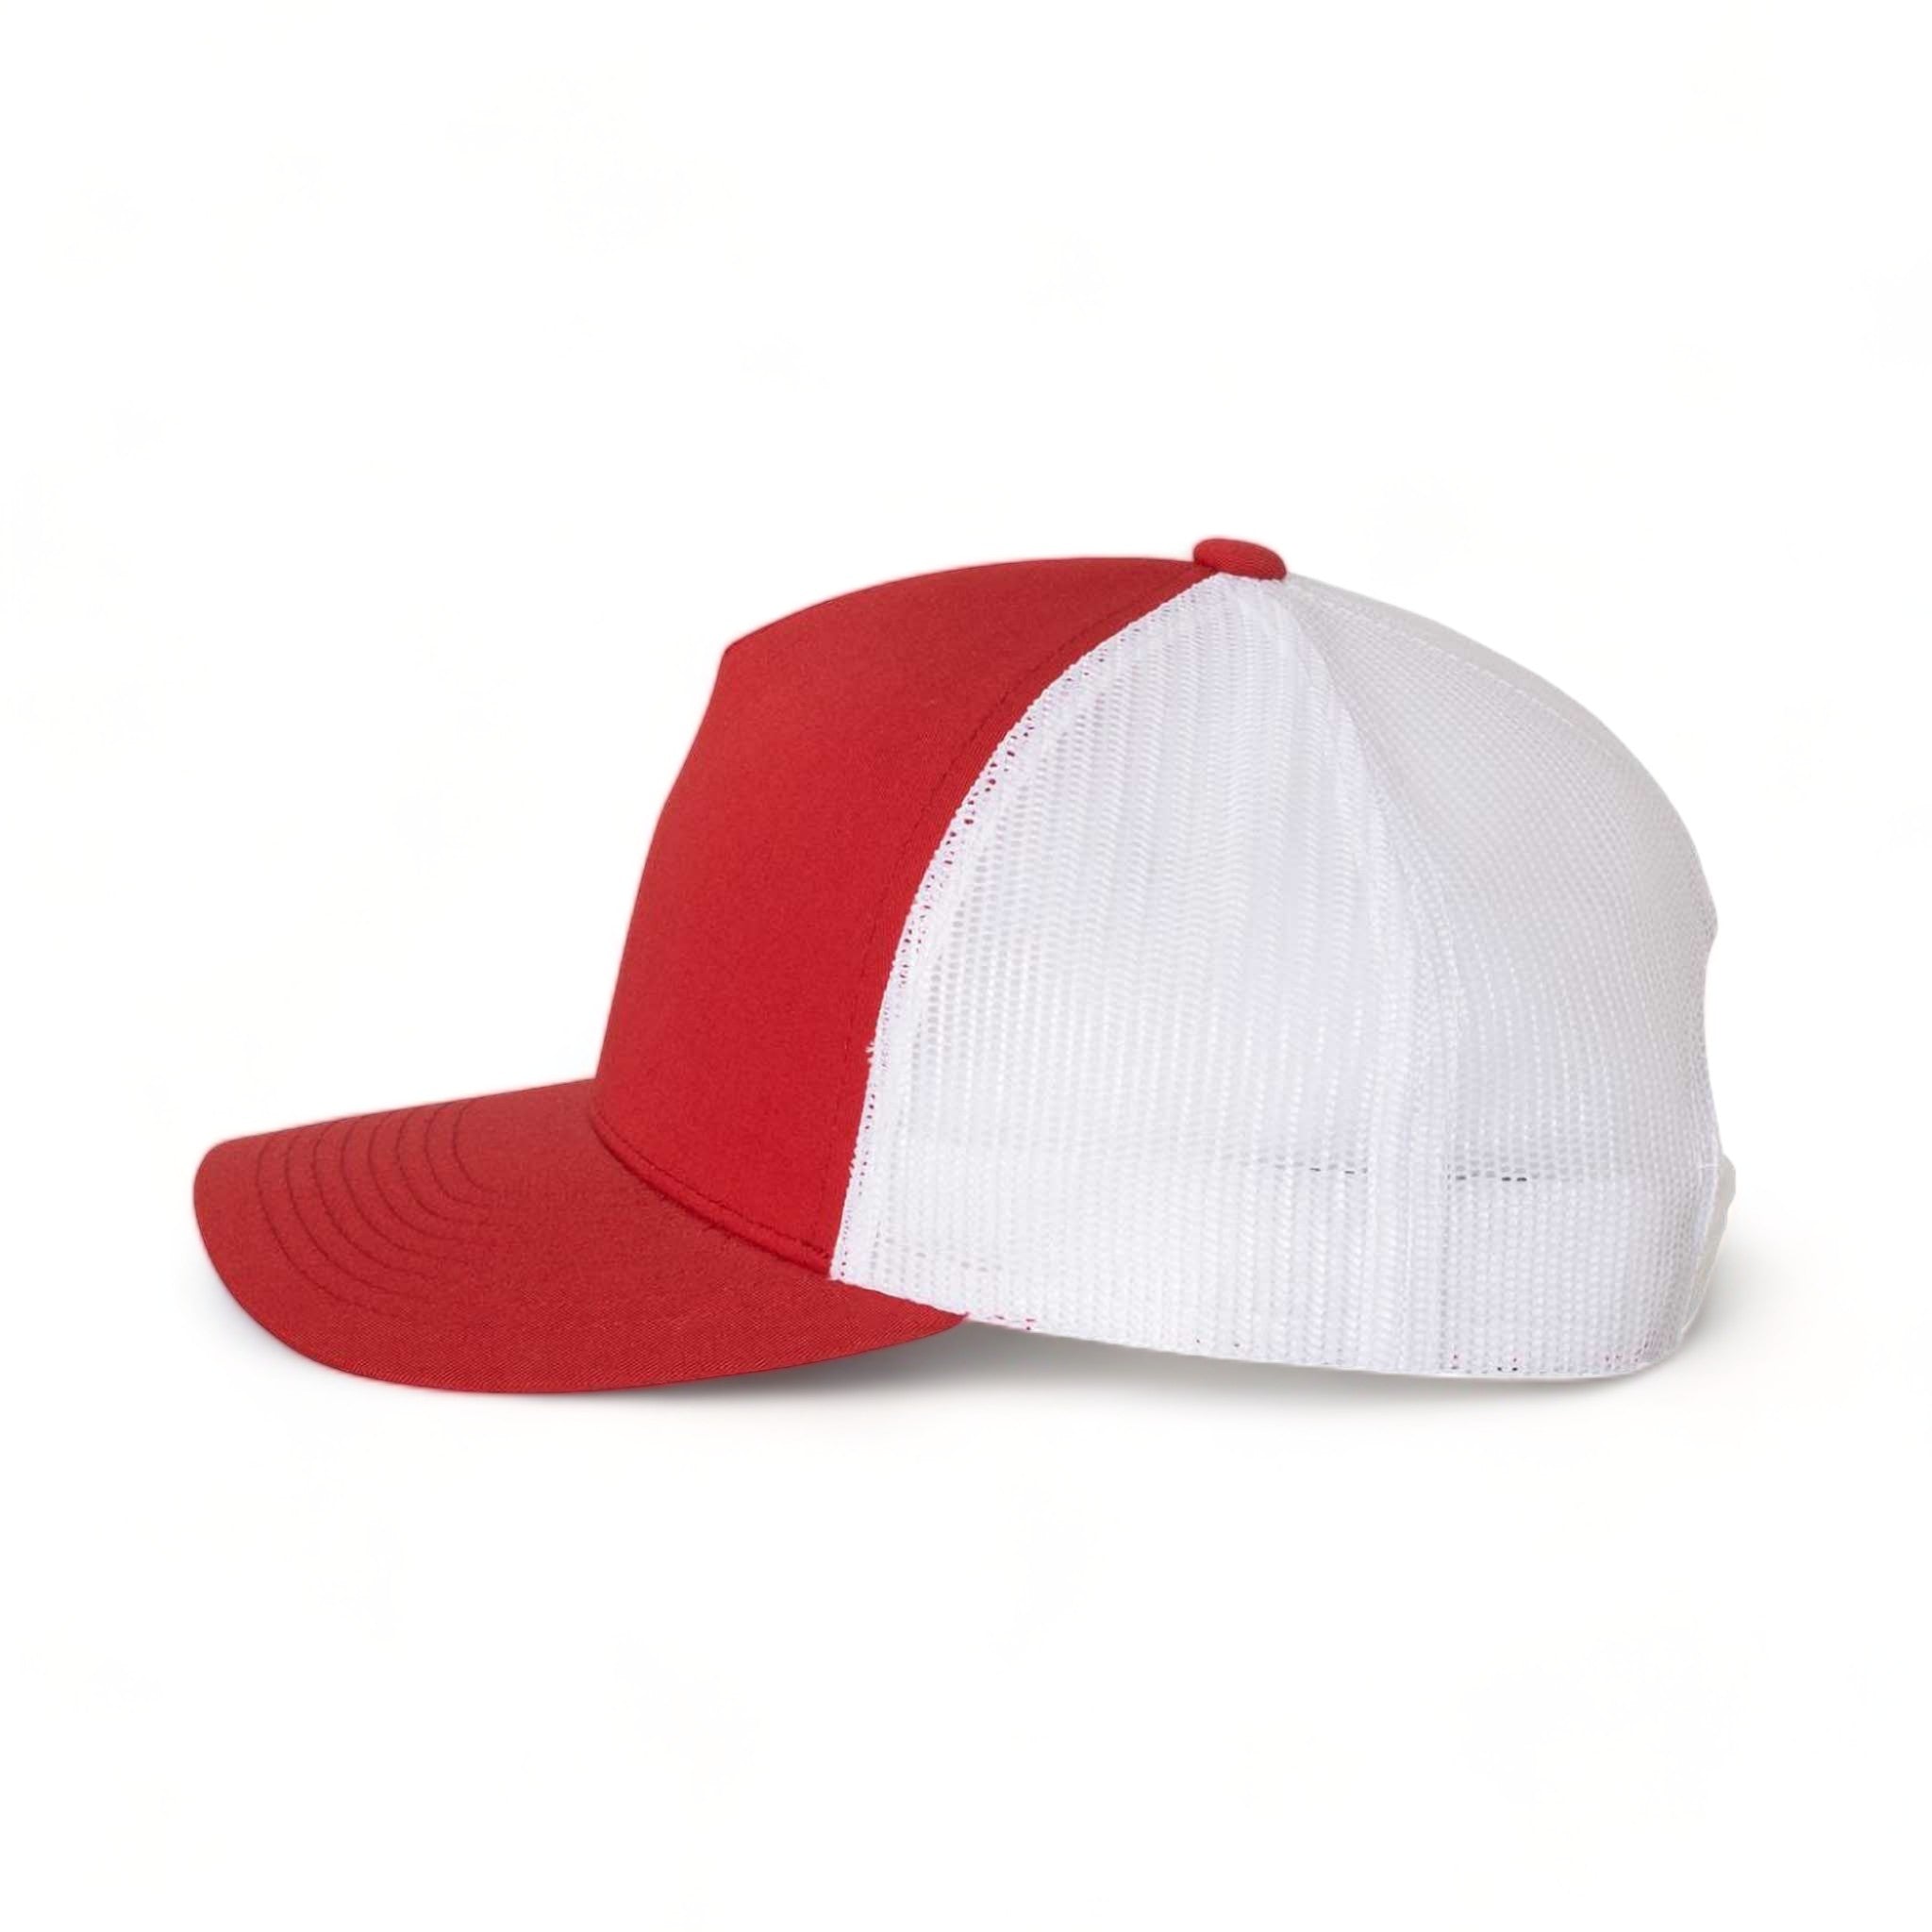 Side view of YP Classics 6506 custom hat in red and white